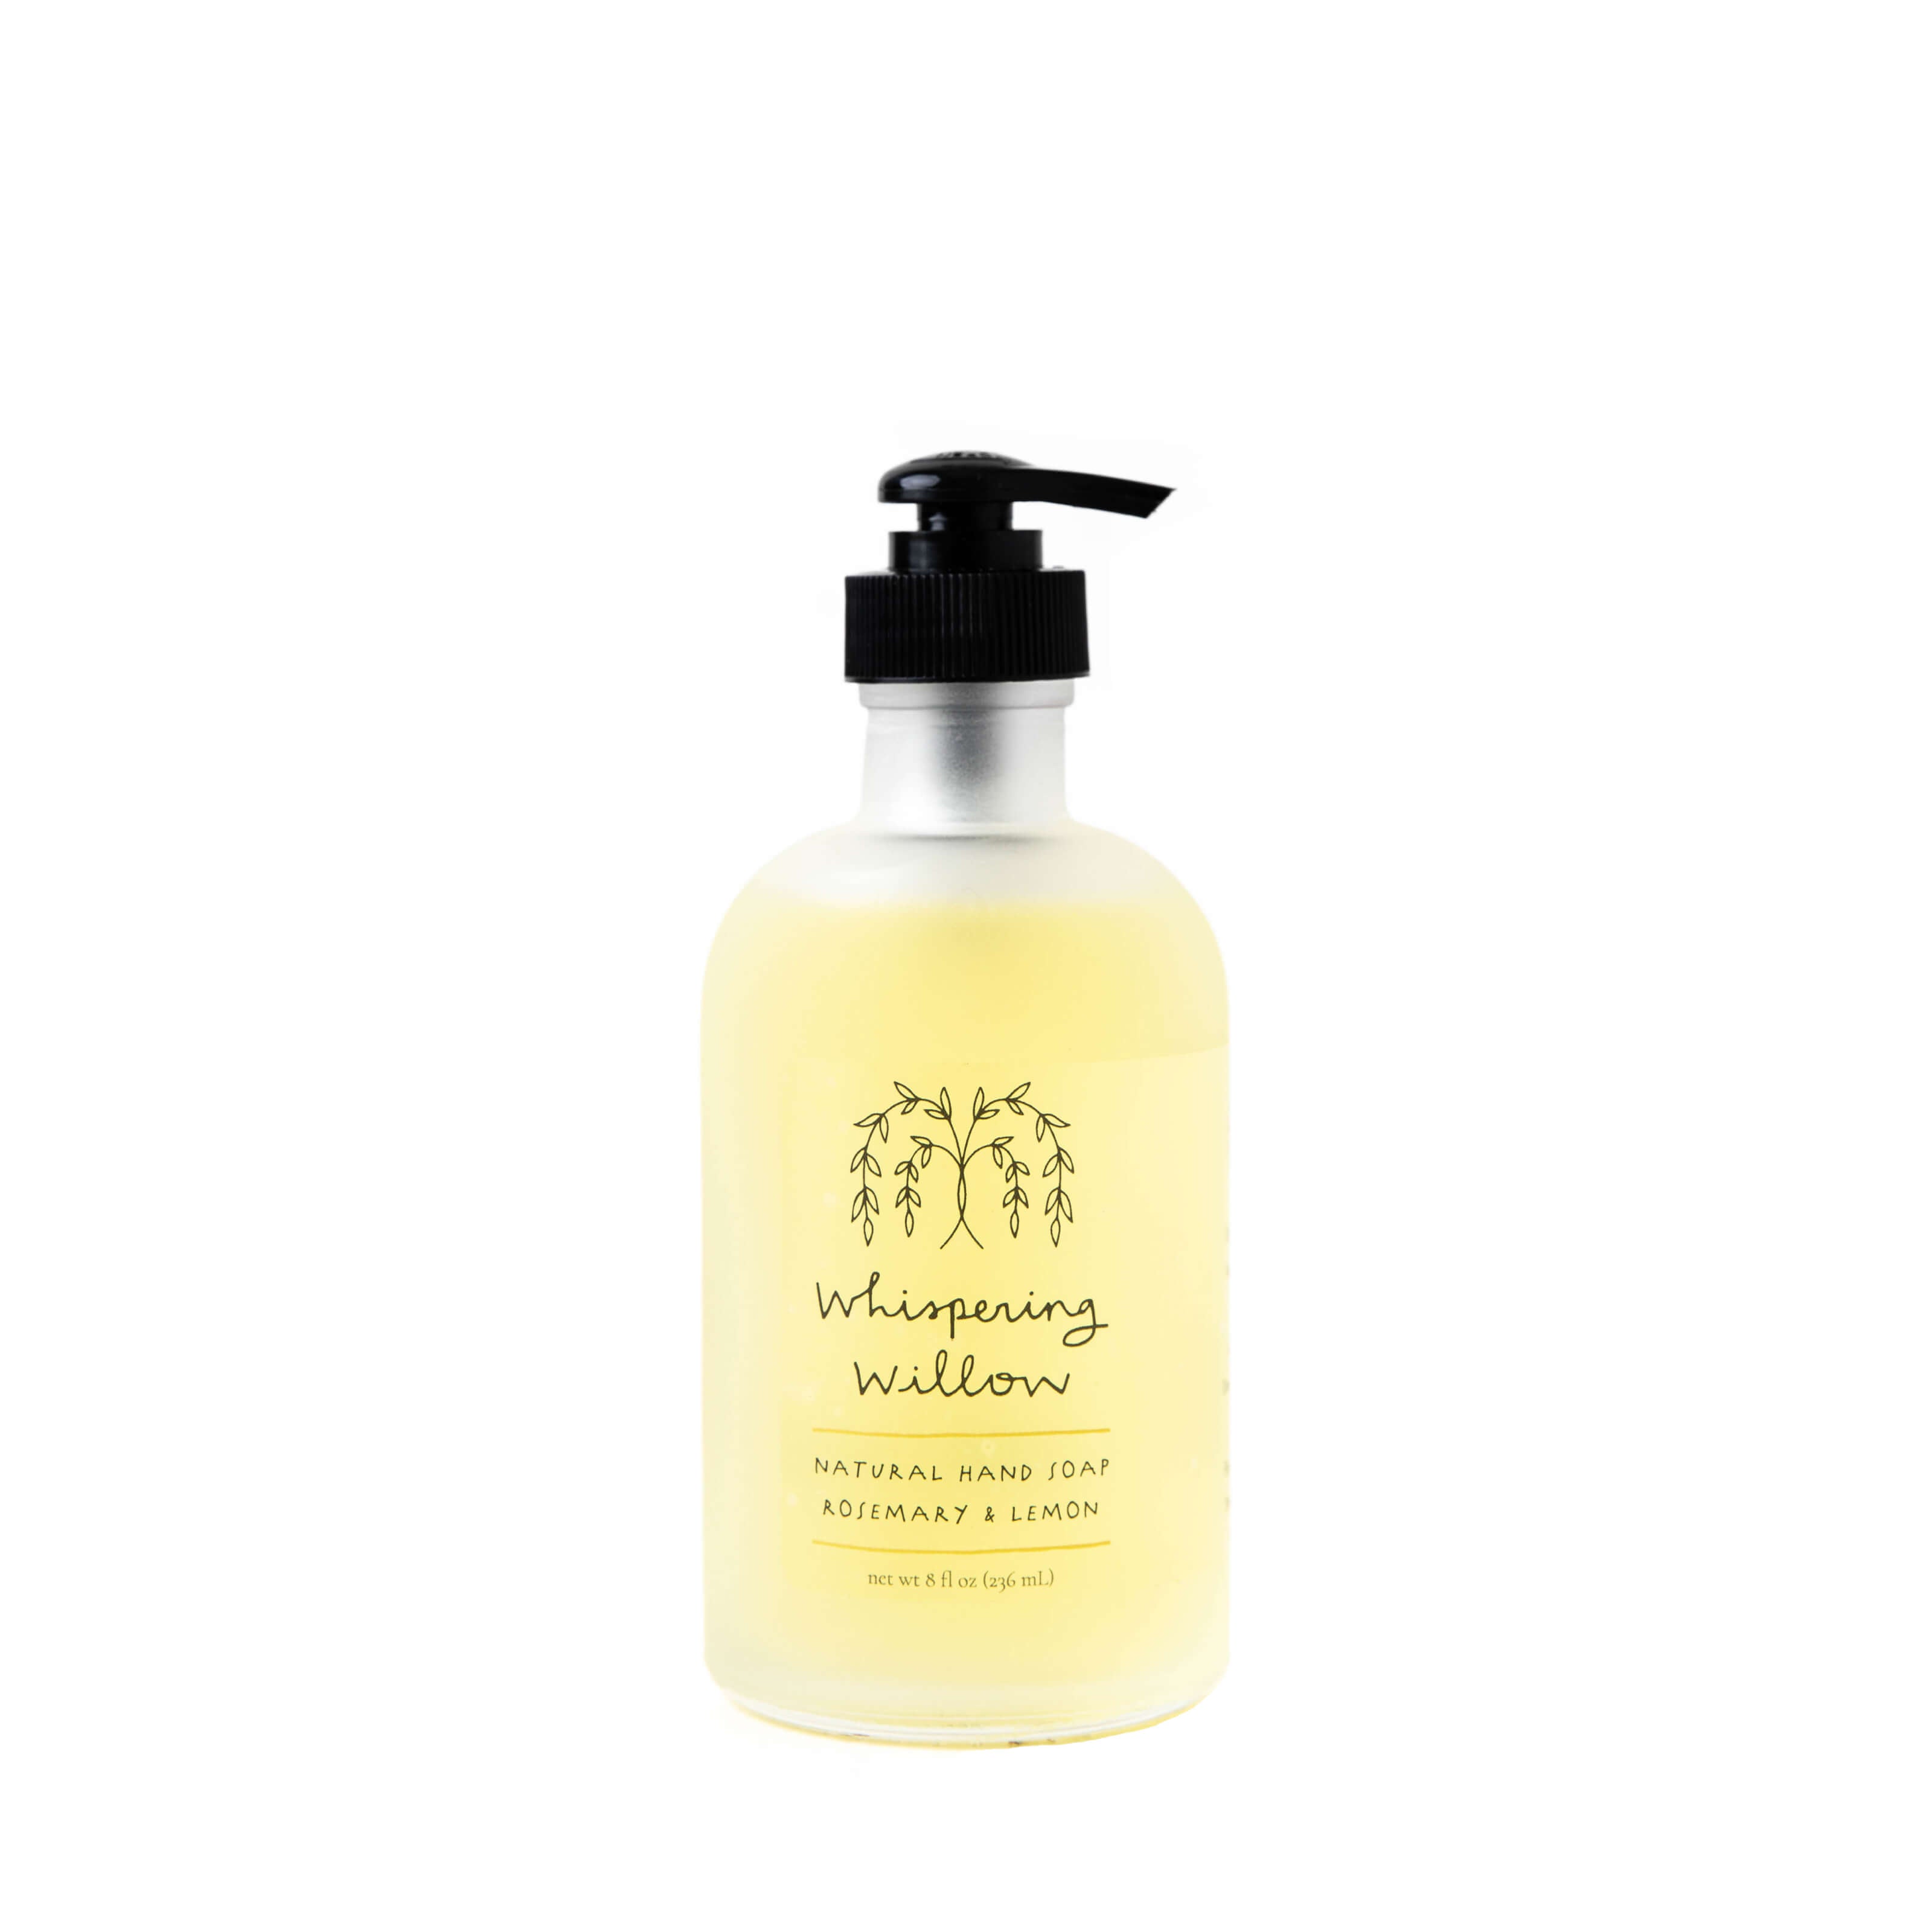 Natural Hand Soap with Rosemary and Mint Blend of Essential Oils - Bulk